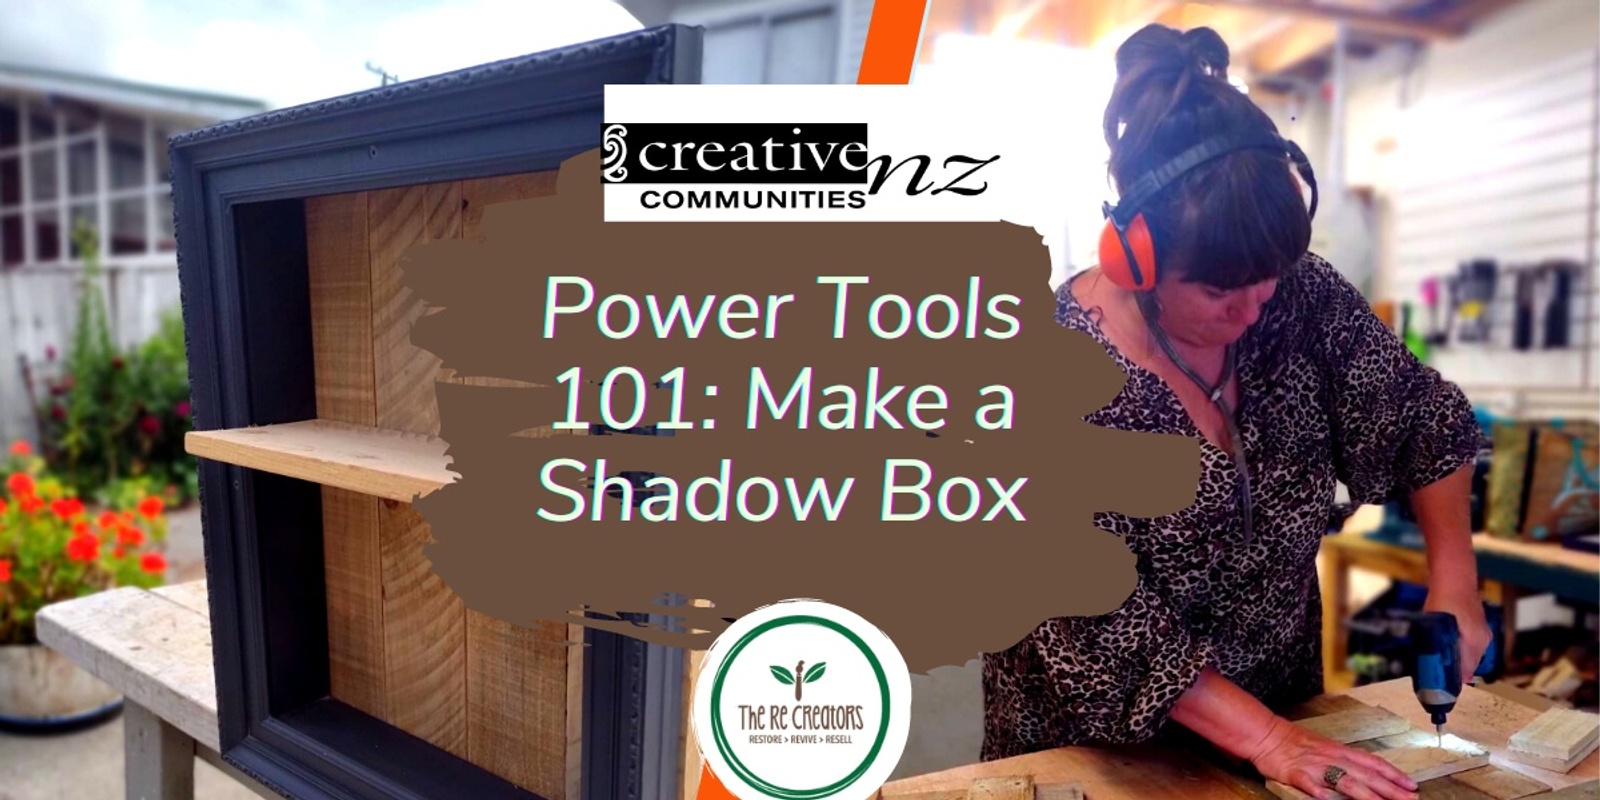 Power Tools 101: Make a Shadow Box or Picture Frame Shelf,  Glen Eden Community House Saturday 17 June 10am-12noon  